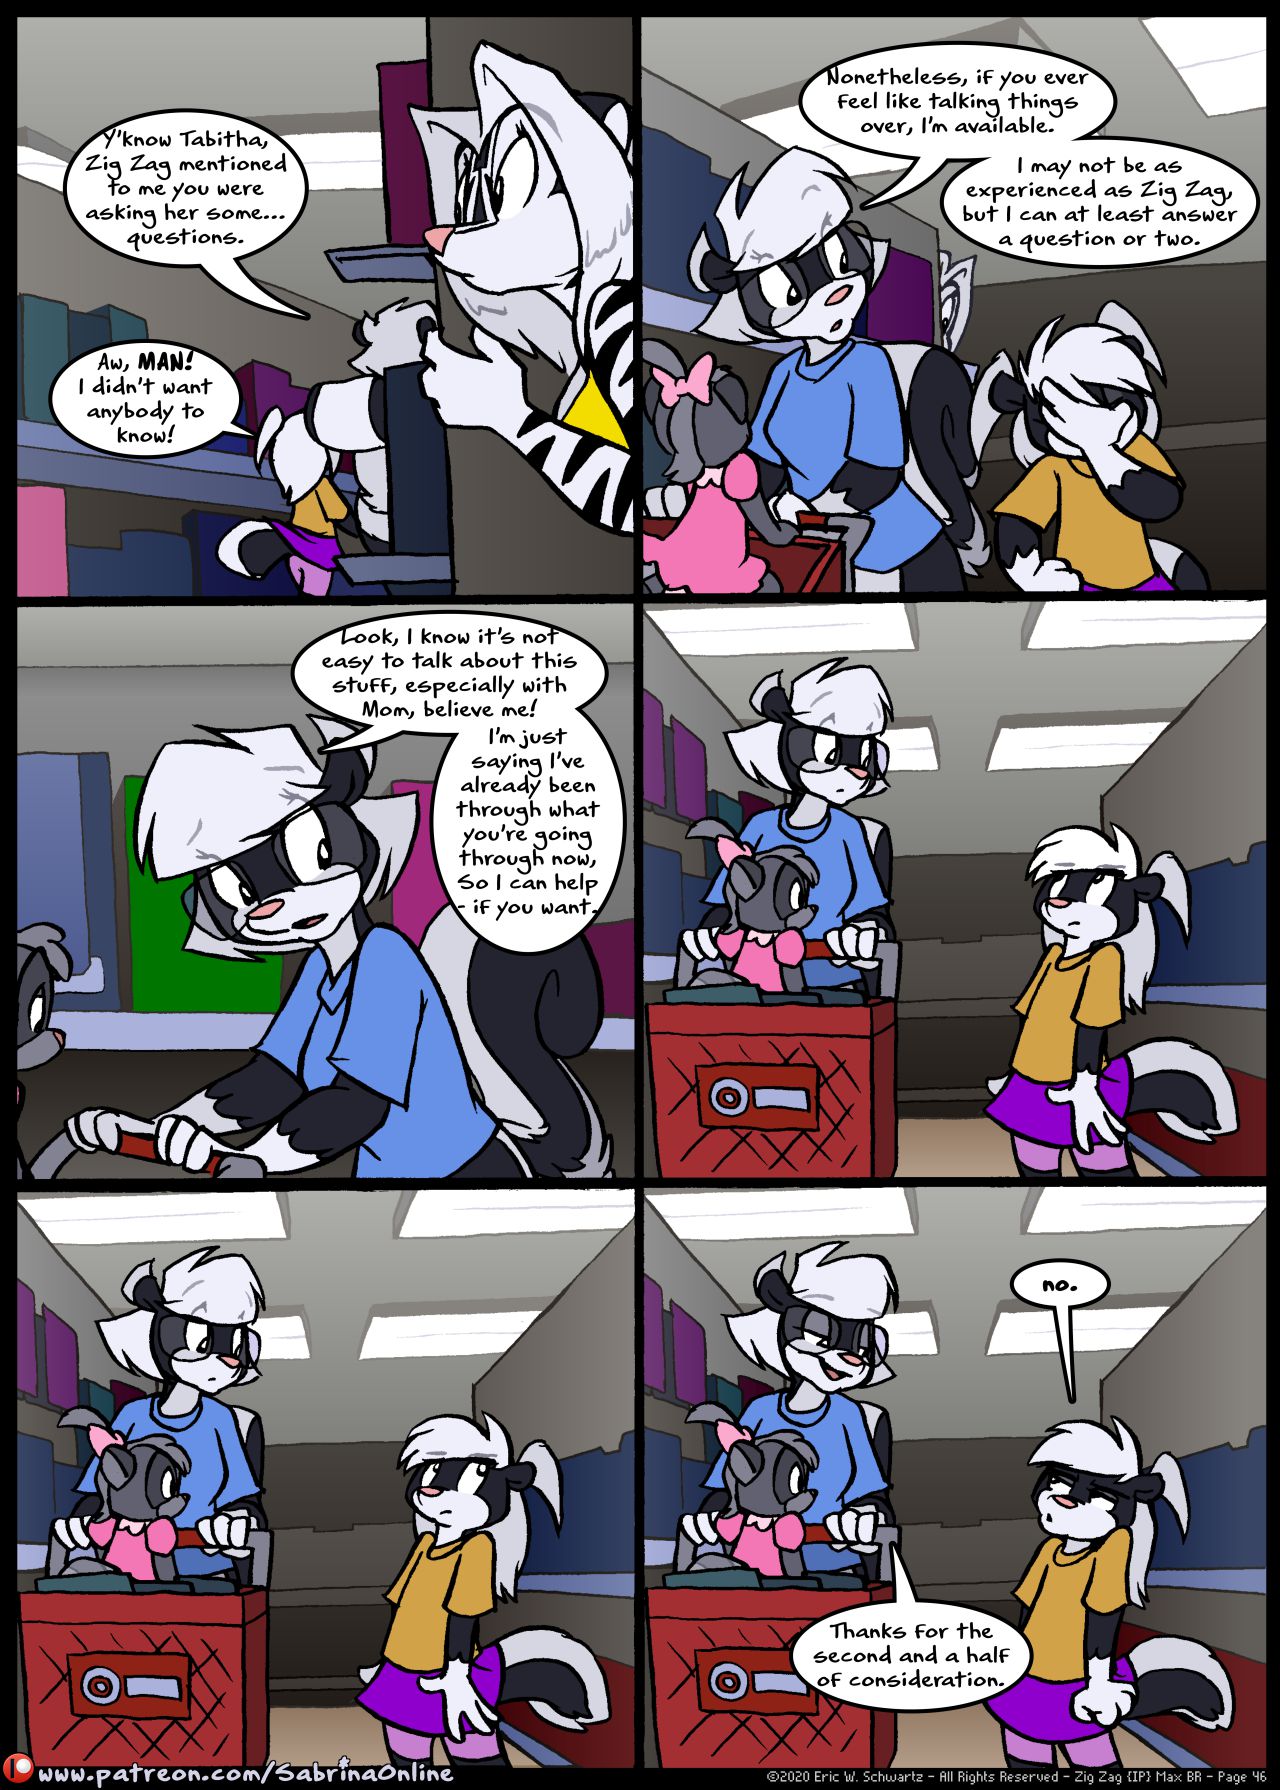 [Eric W. Schwartz] Sabrina Online: Skunks' Day Out (Ongoing) 46